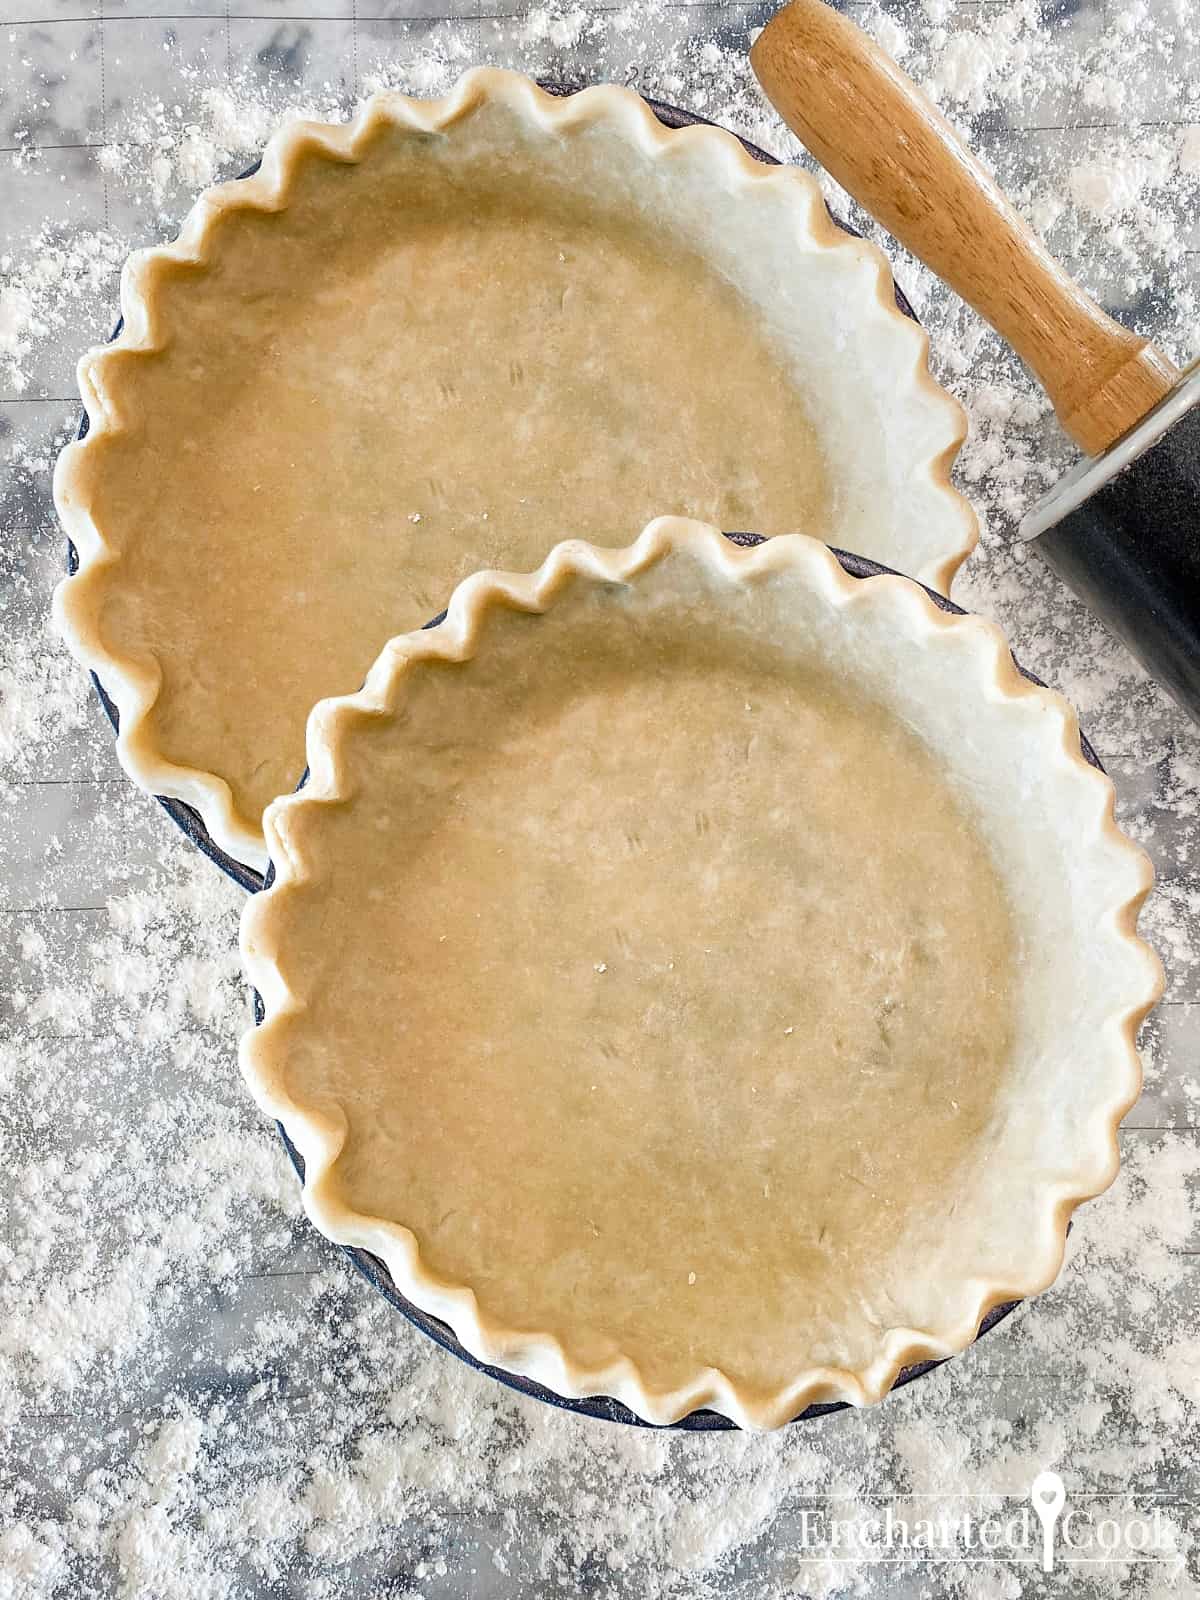 Two pie crust shells in pans on a floured surface with a rolling pin.